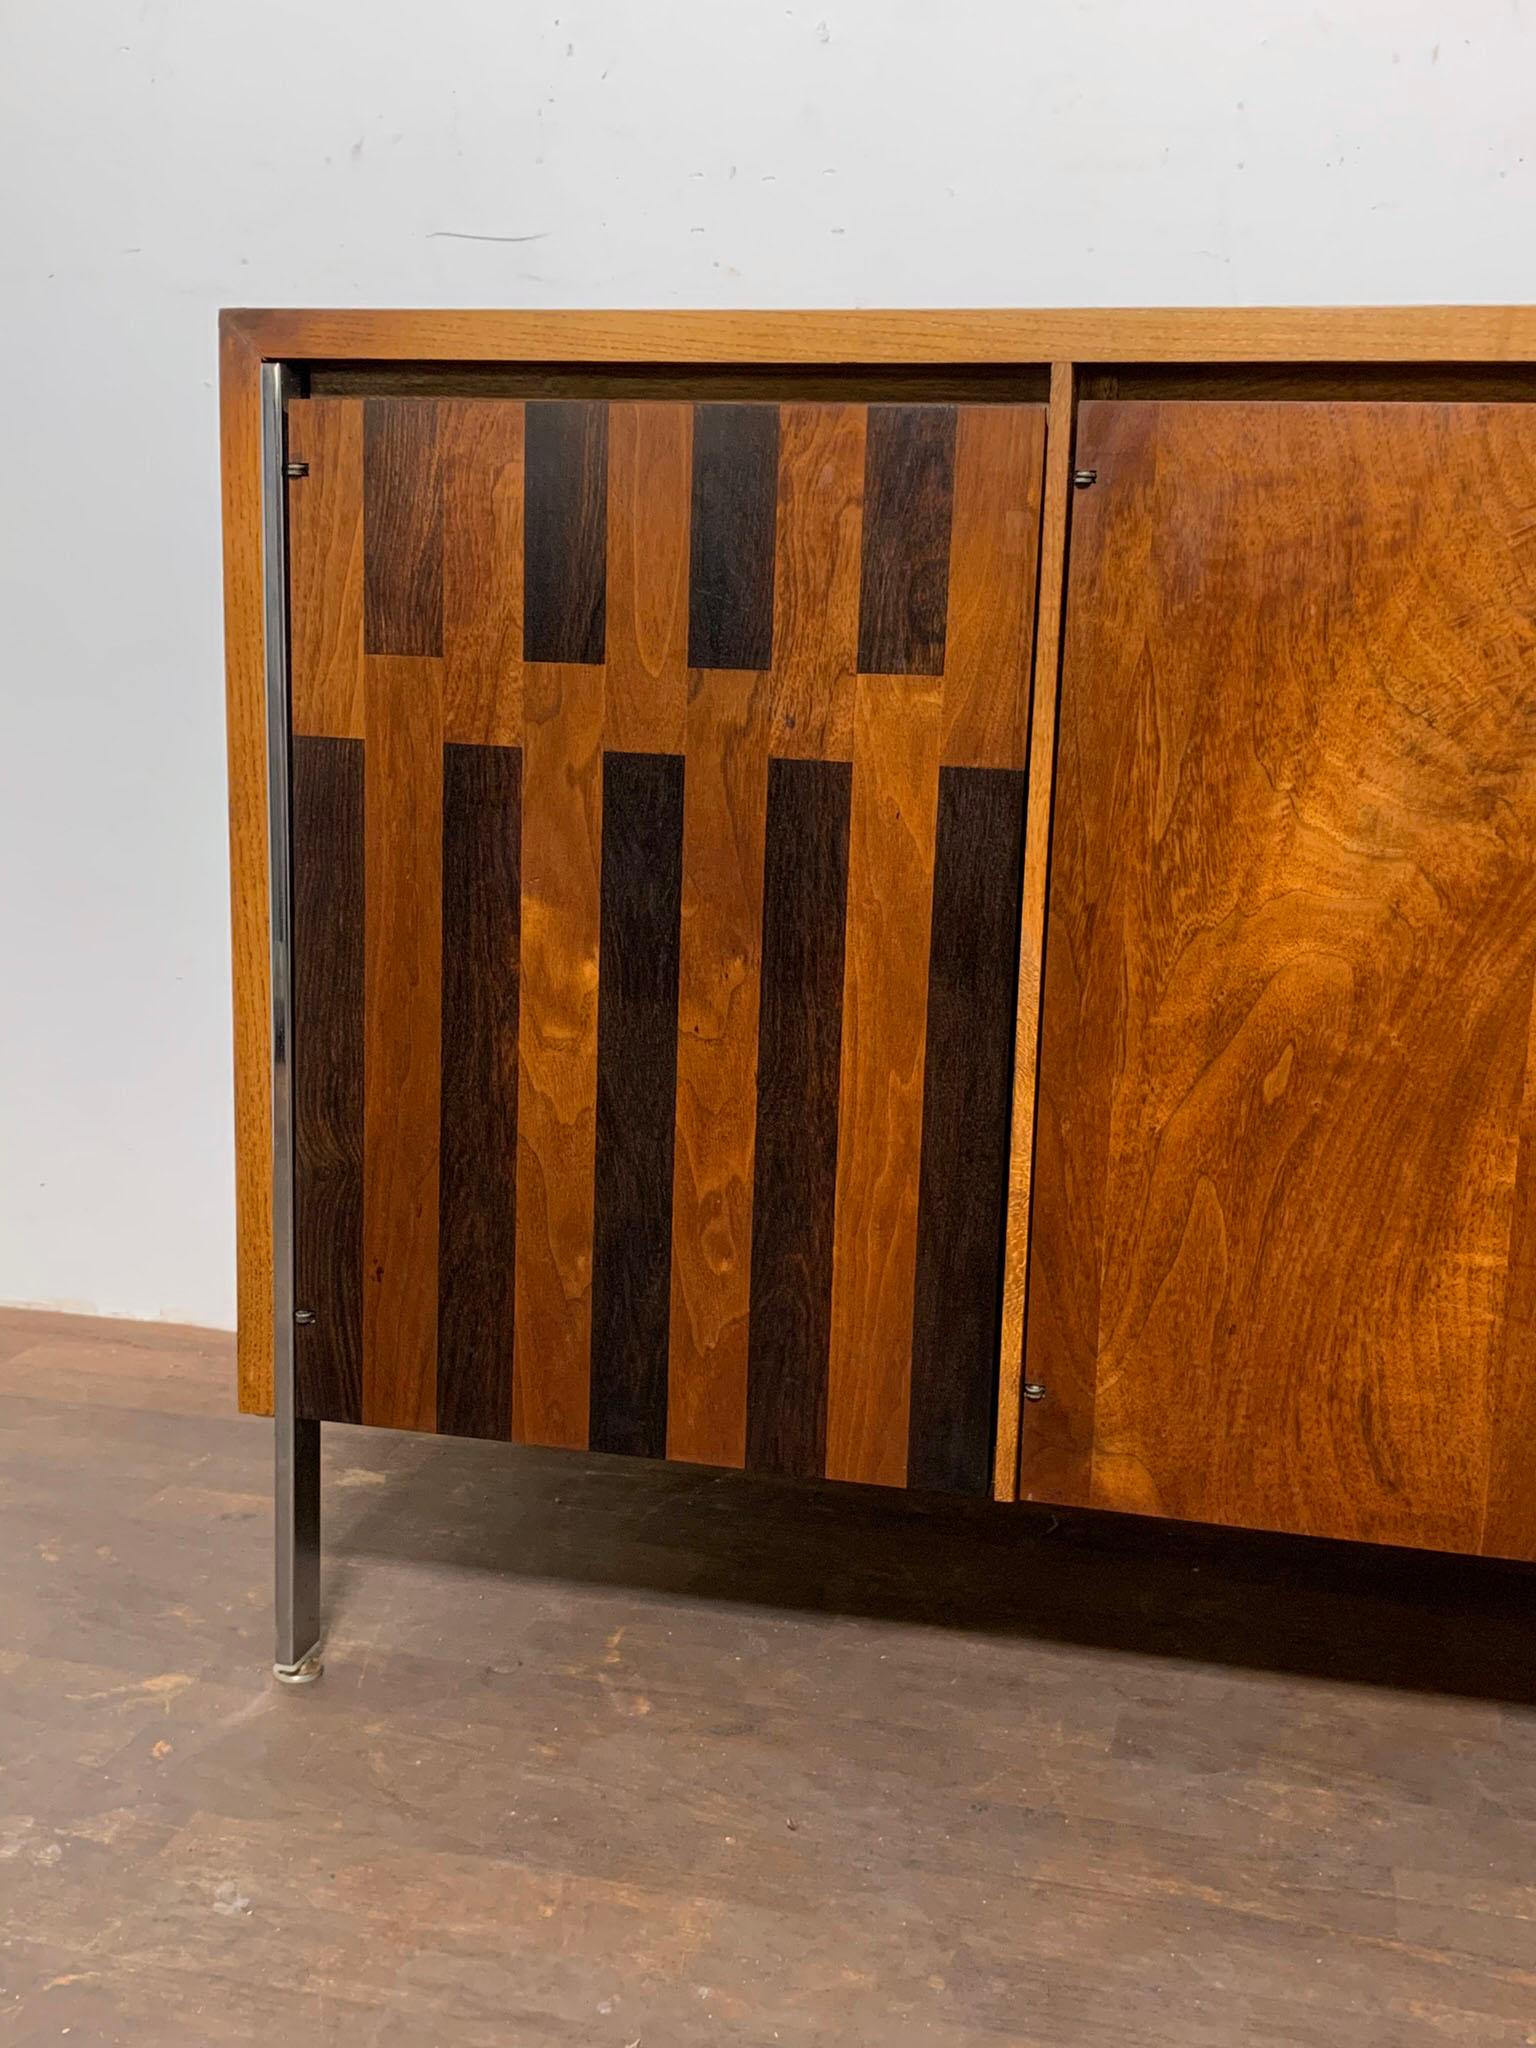 A walnut and rosewood inlay credenza designed by H. Paul Browning for Stanley Furniture, ca. 1960s.